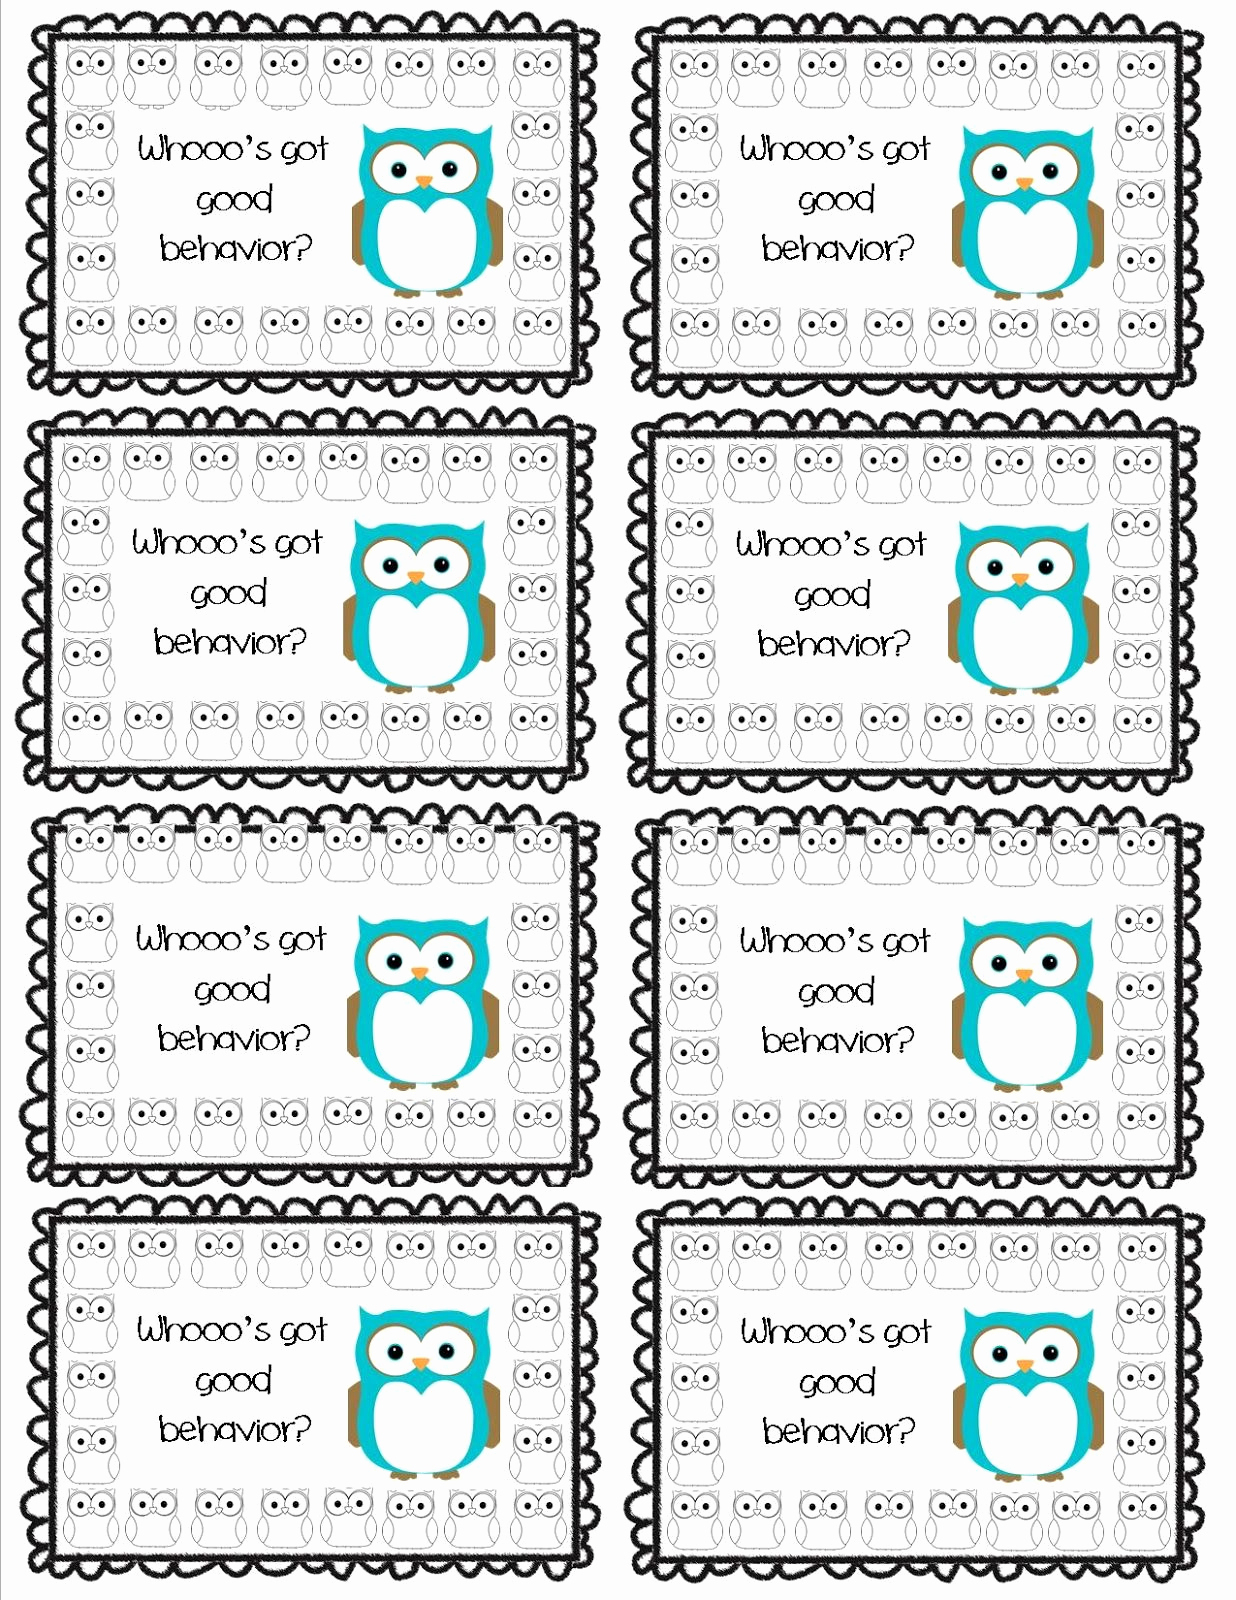 Free Printable Punch Card Template And Whooo S Got Good In Reward Punch Card Template